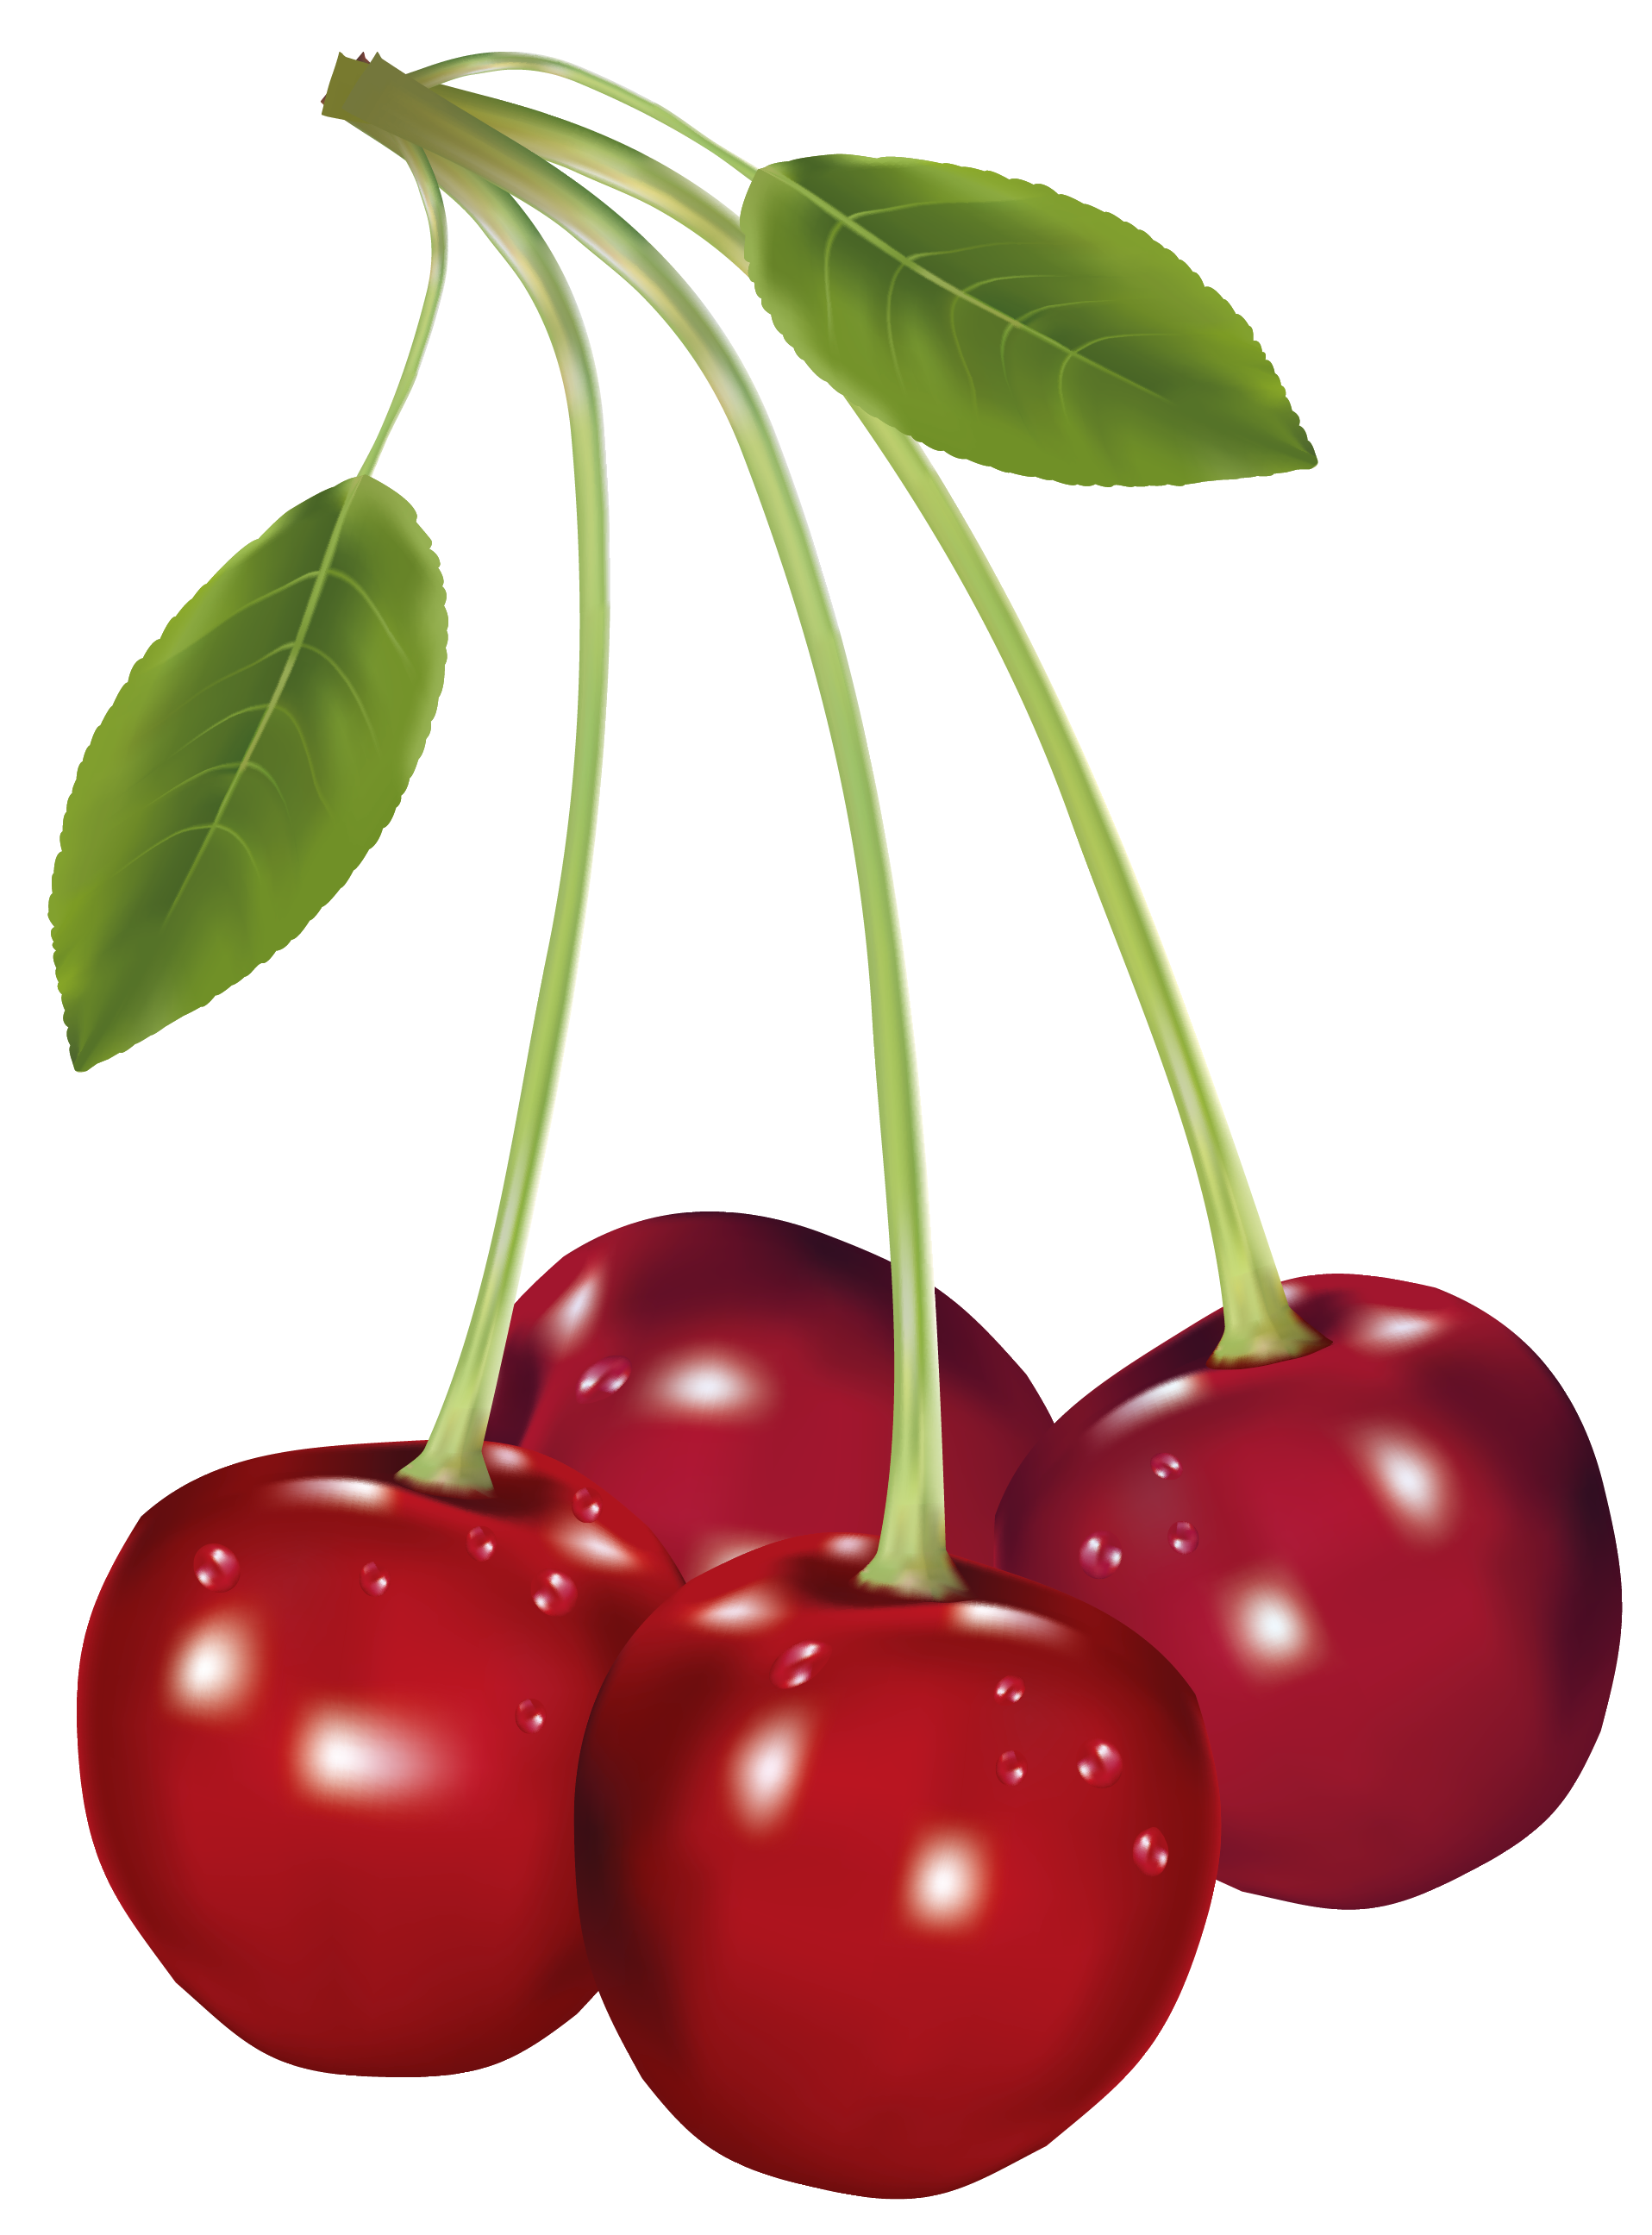 Cherries png picture gallery. Plant clipart land plant